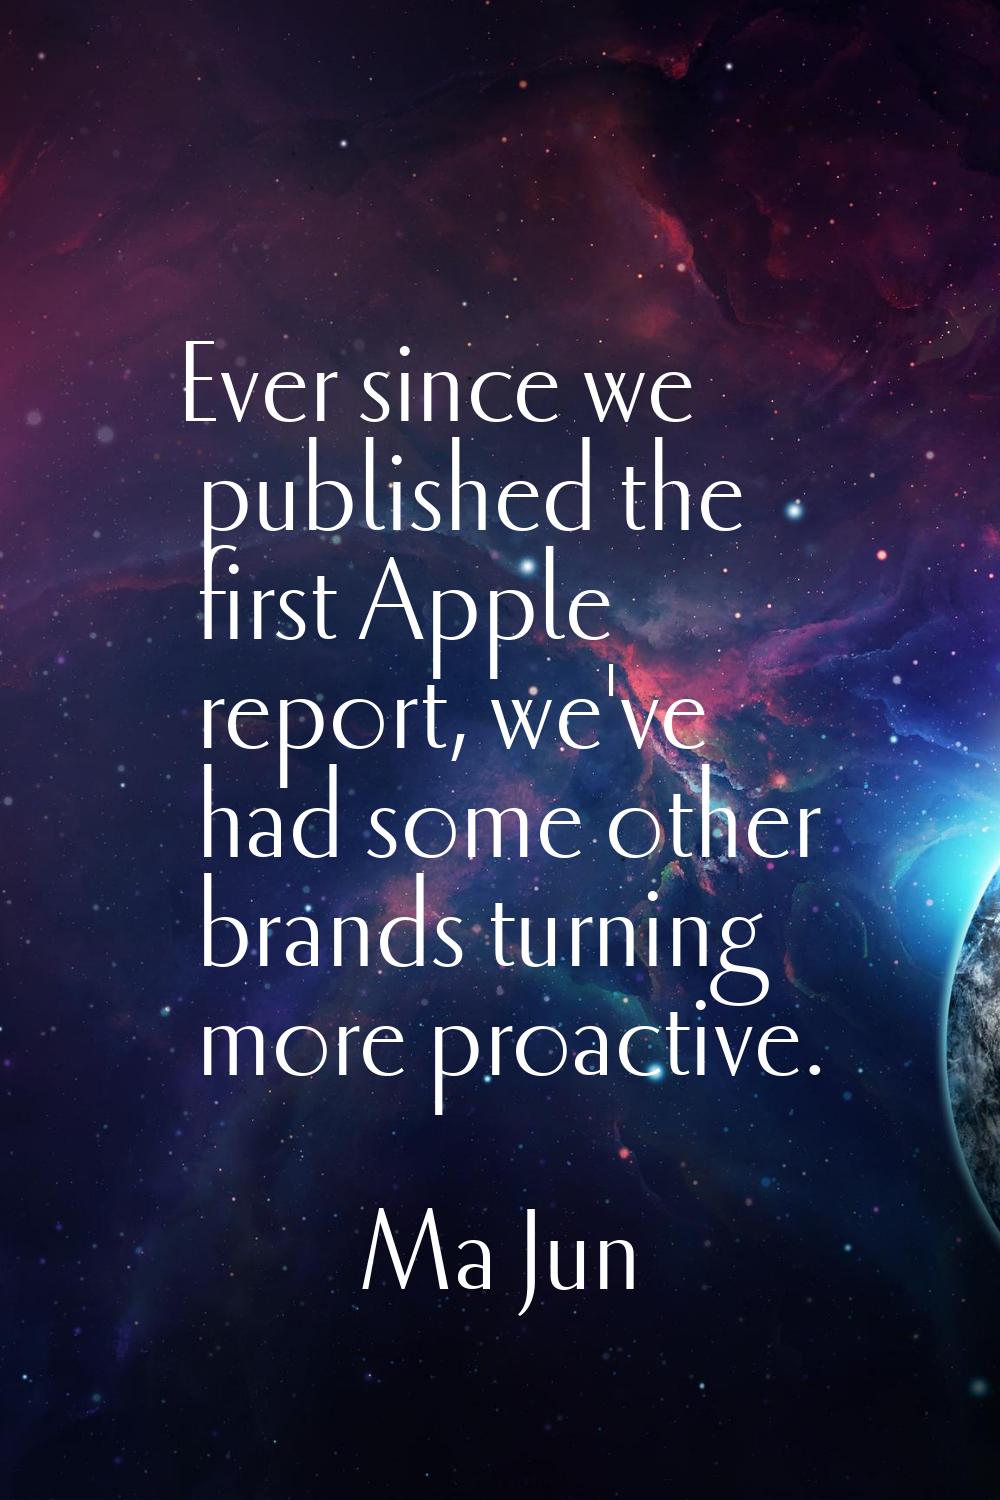 Ever since we published the first Apple report, we've had some other brands turning more proactive.